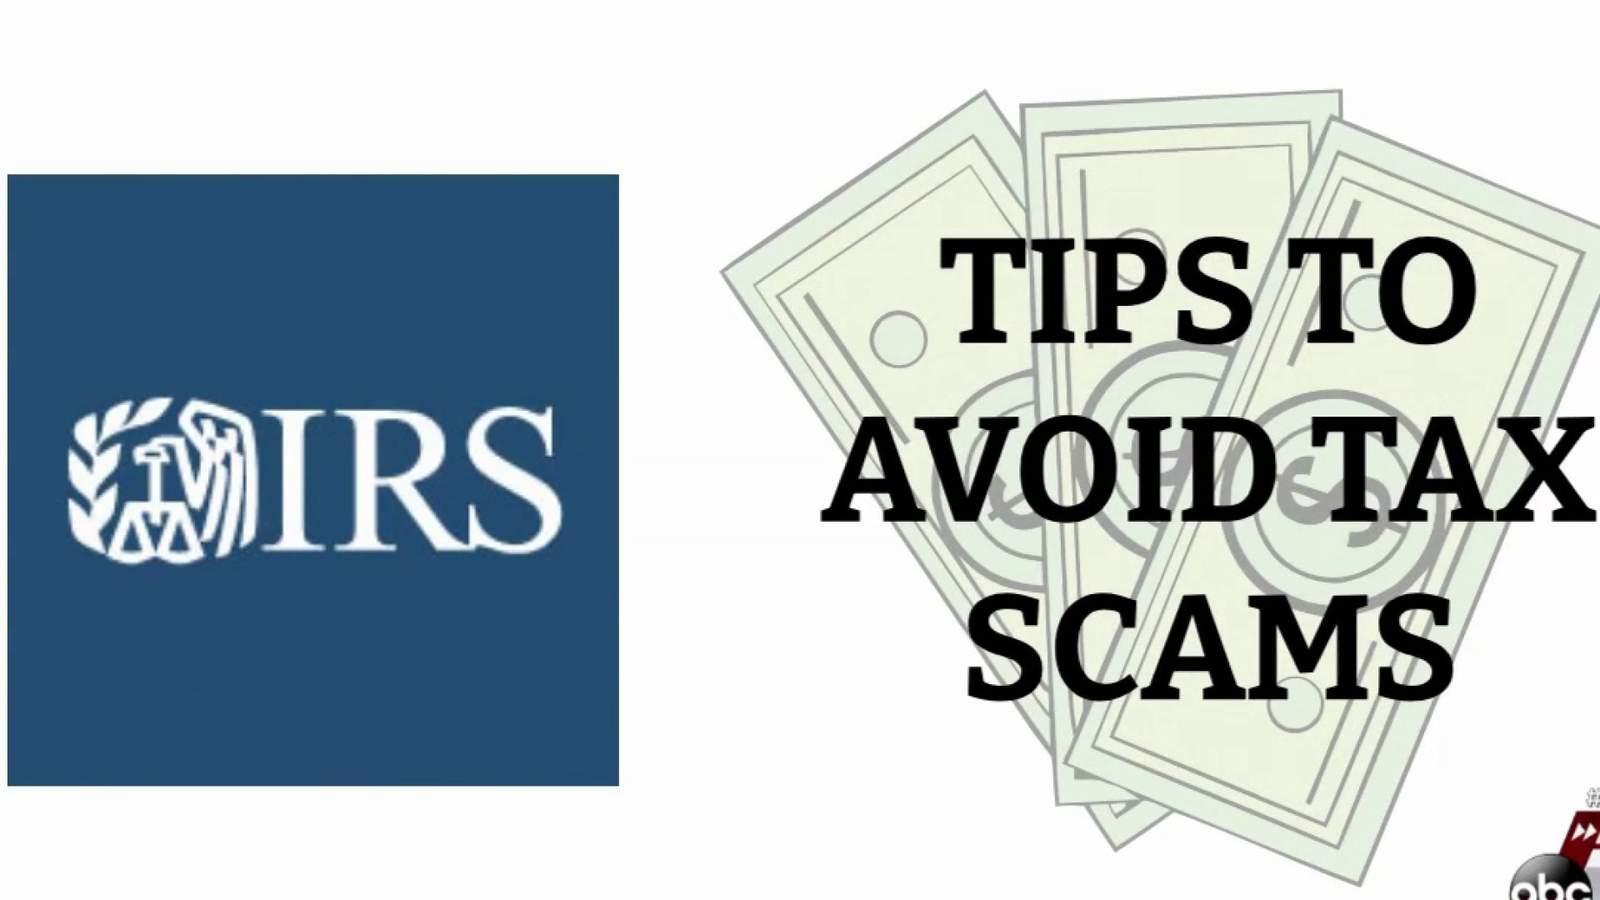 Filing a tax return? Here are some ways to avoid scams and keep your personal information safe.